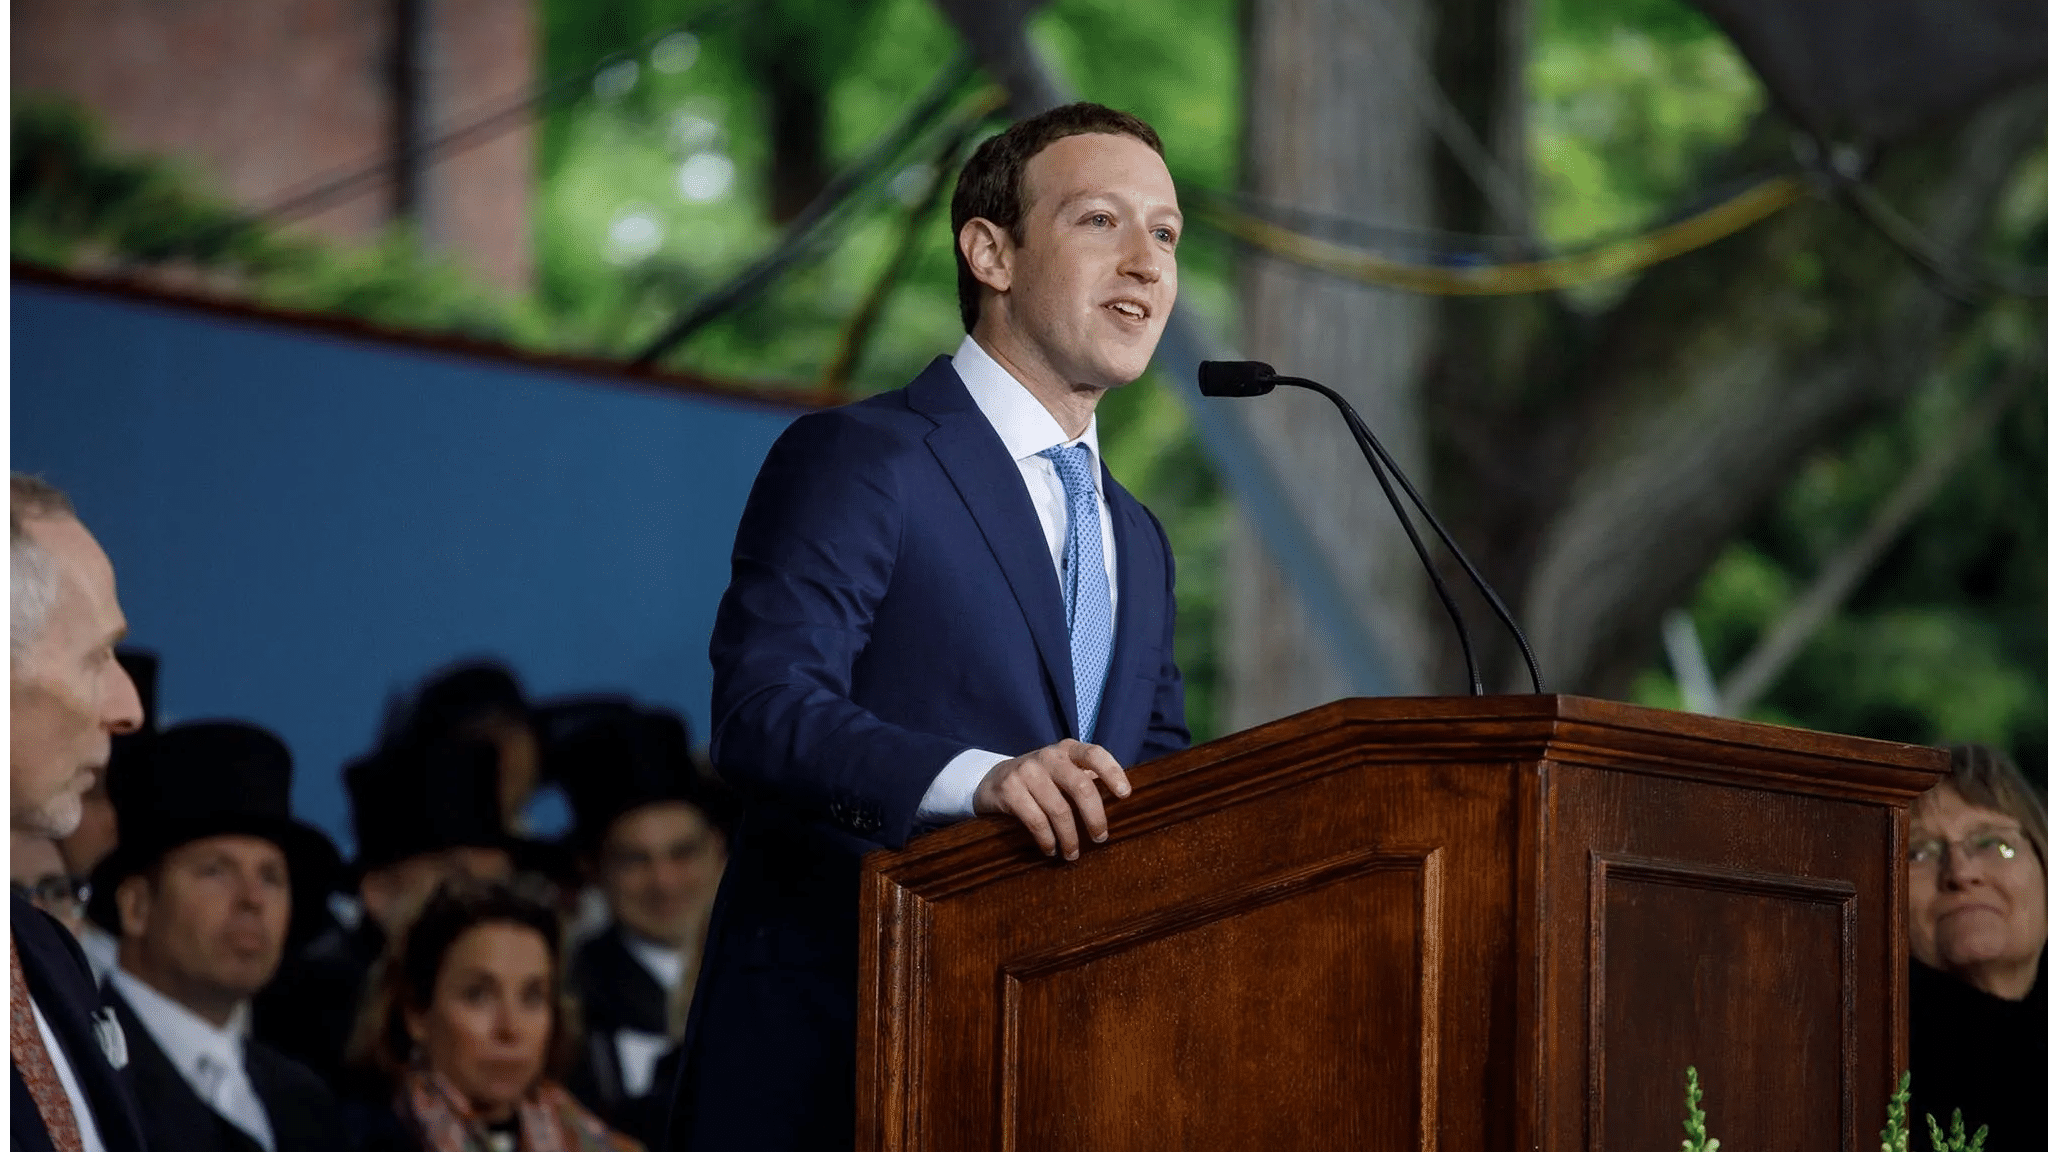 ‘Will ban any post that denies or distorts the Holocaust’: Mark Zuckerberg